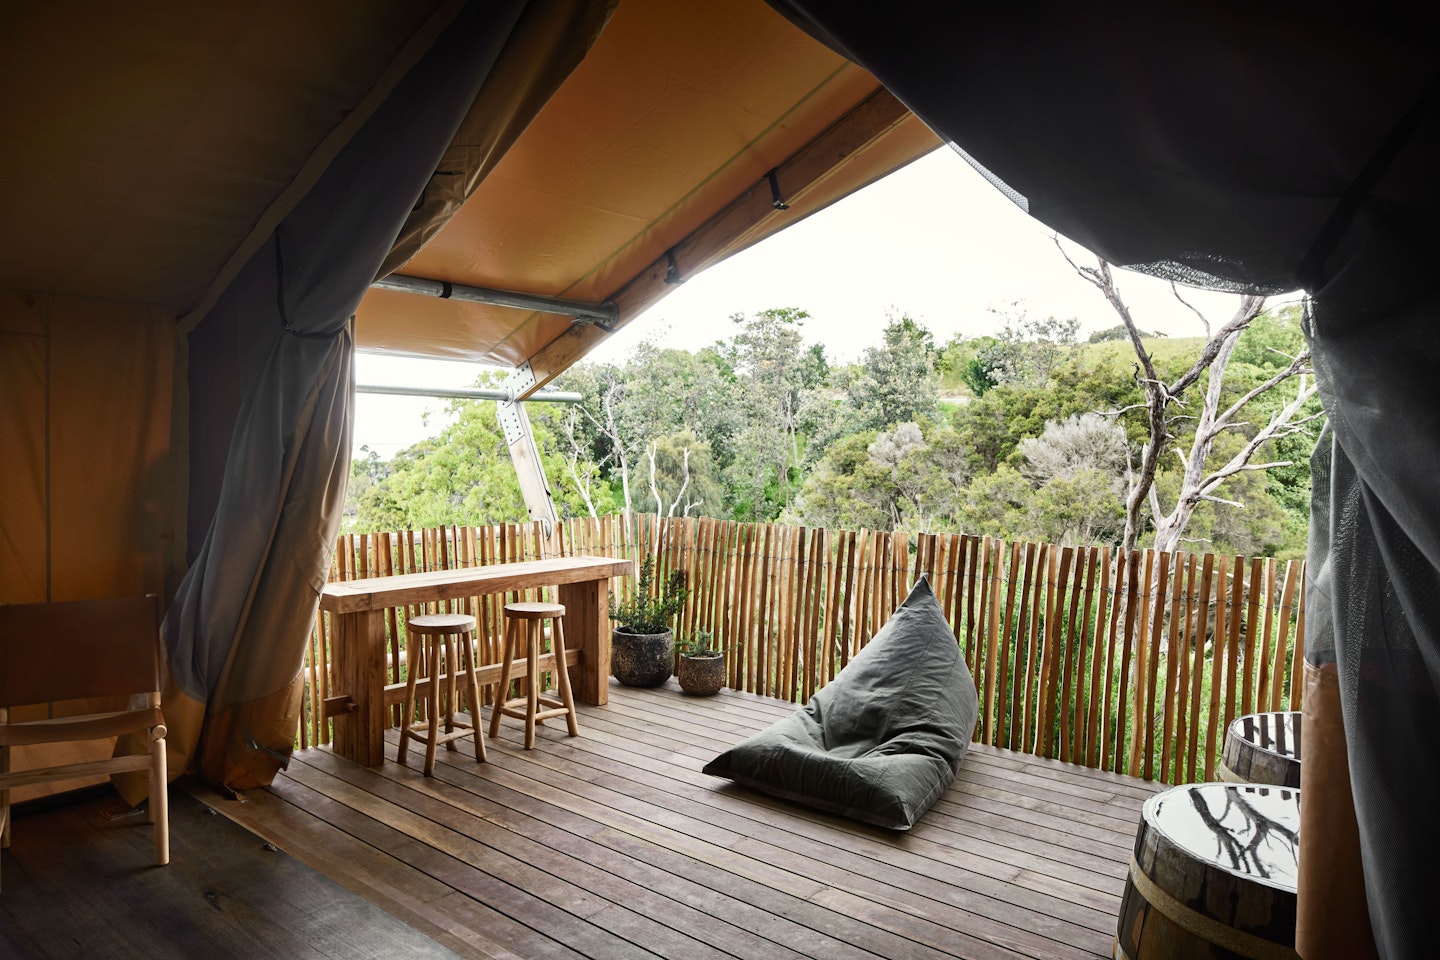 hillside glamping deck and private barrels